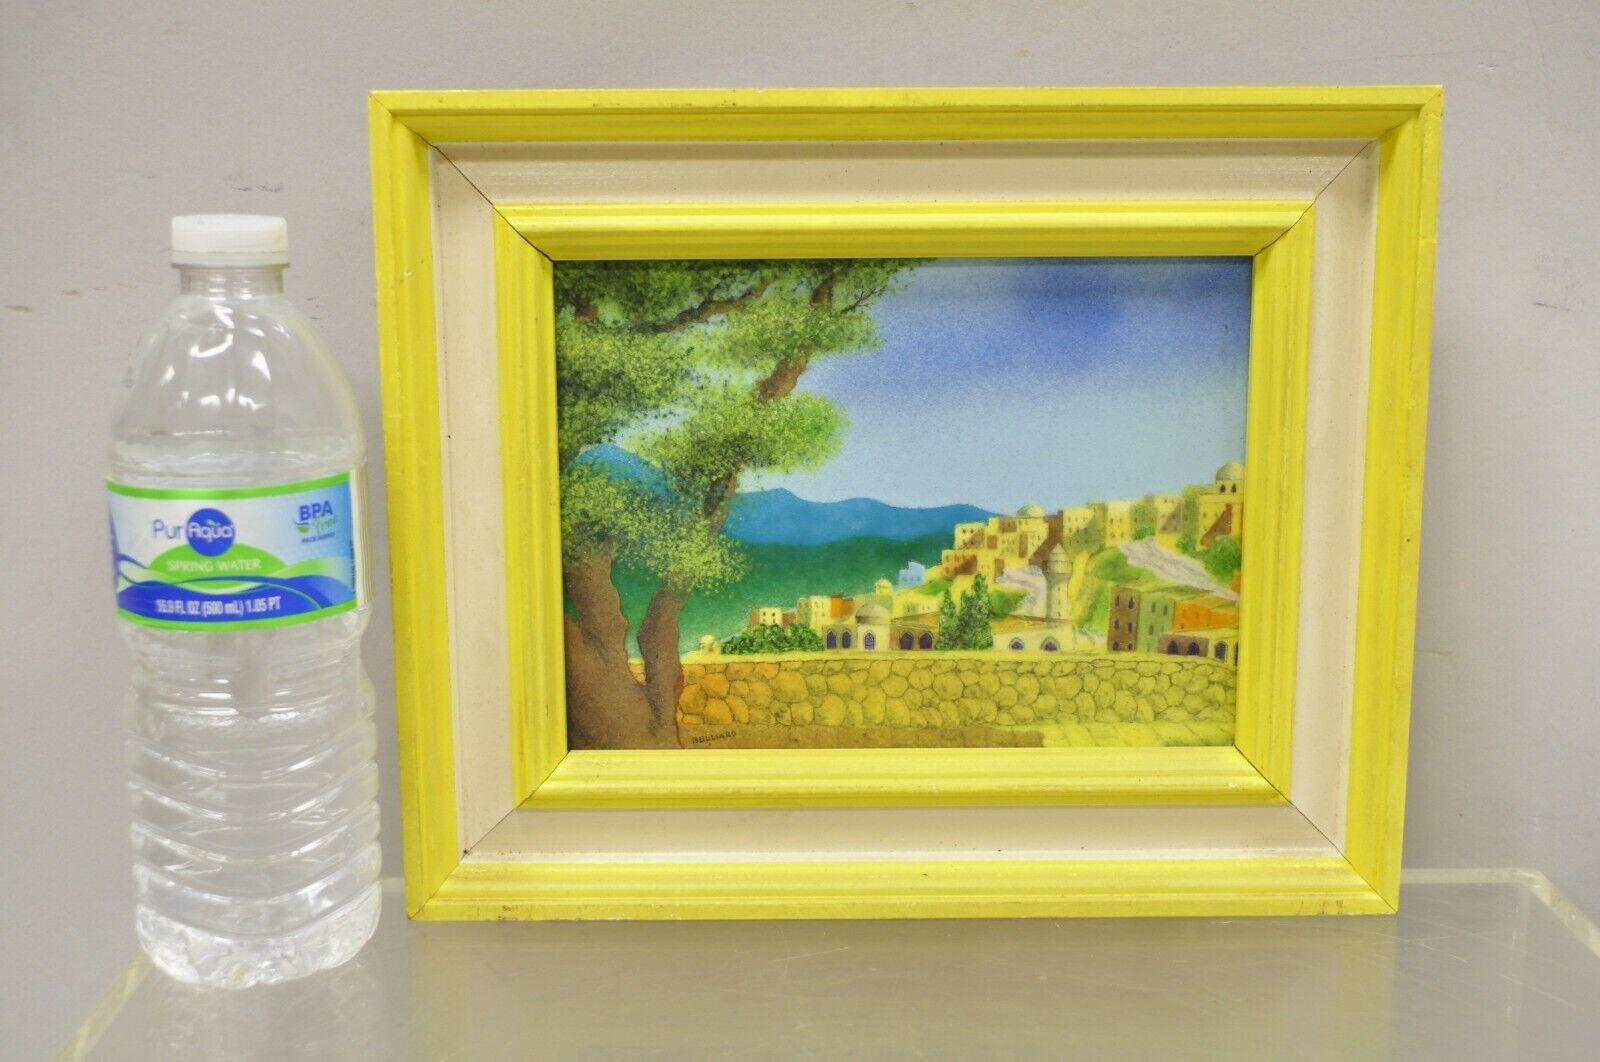 Daniel Belliard Enamel on Copper Small Framed Painting Yellow Countryside. Item features enamel on copper painting, wooden frame, artist signature to bottom left corner, beautiful subject and color. Circa Late 20th Century.
Measurements: 
Frame: